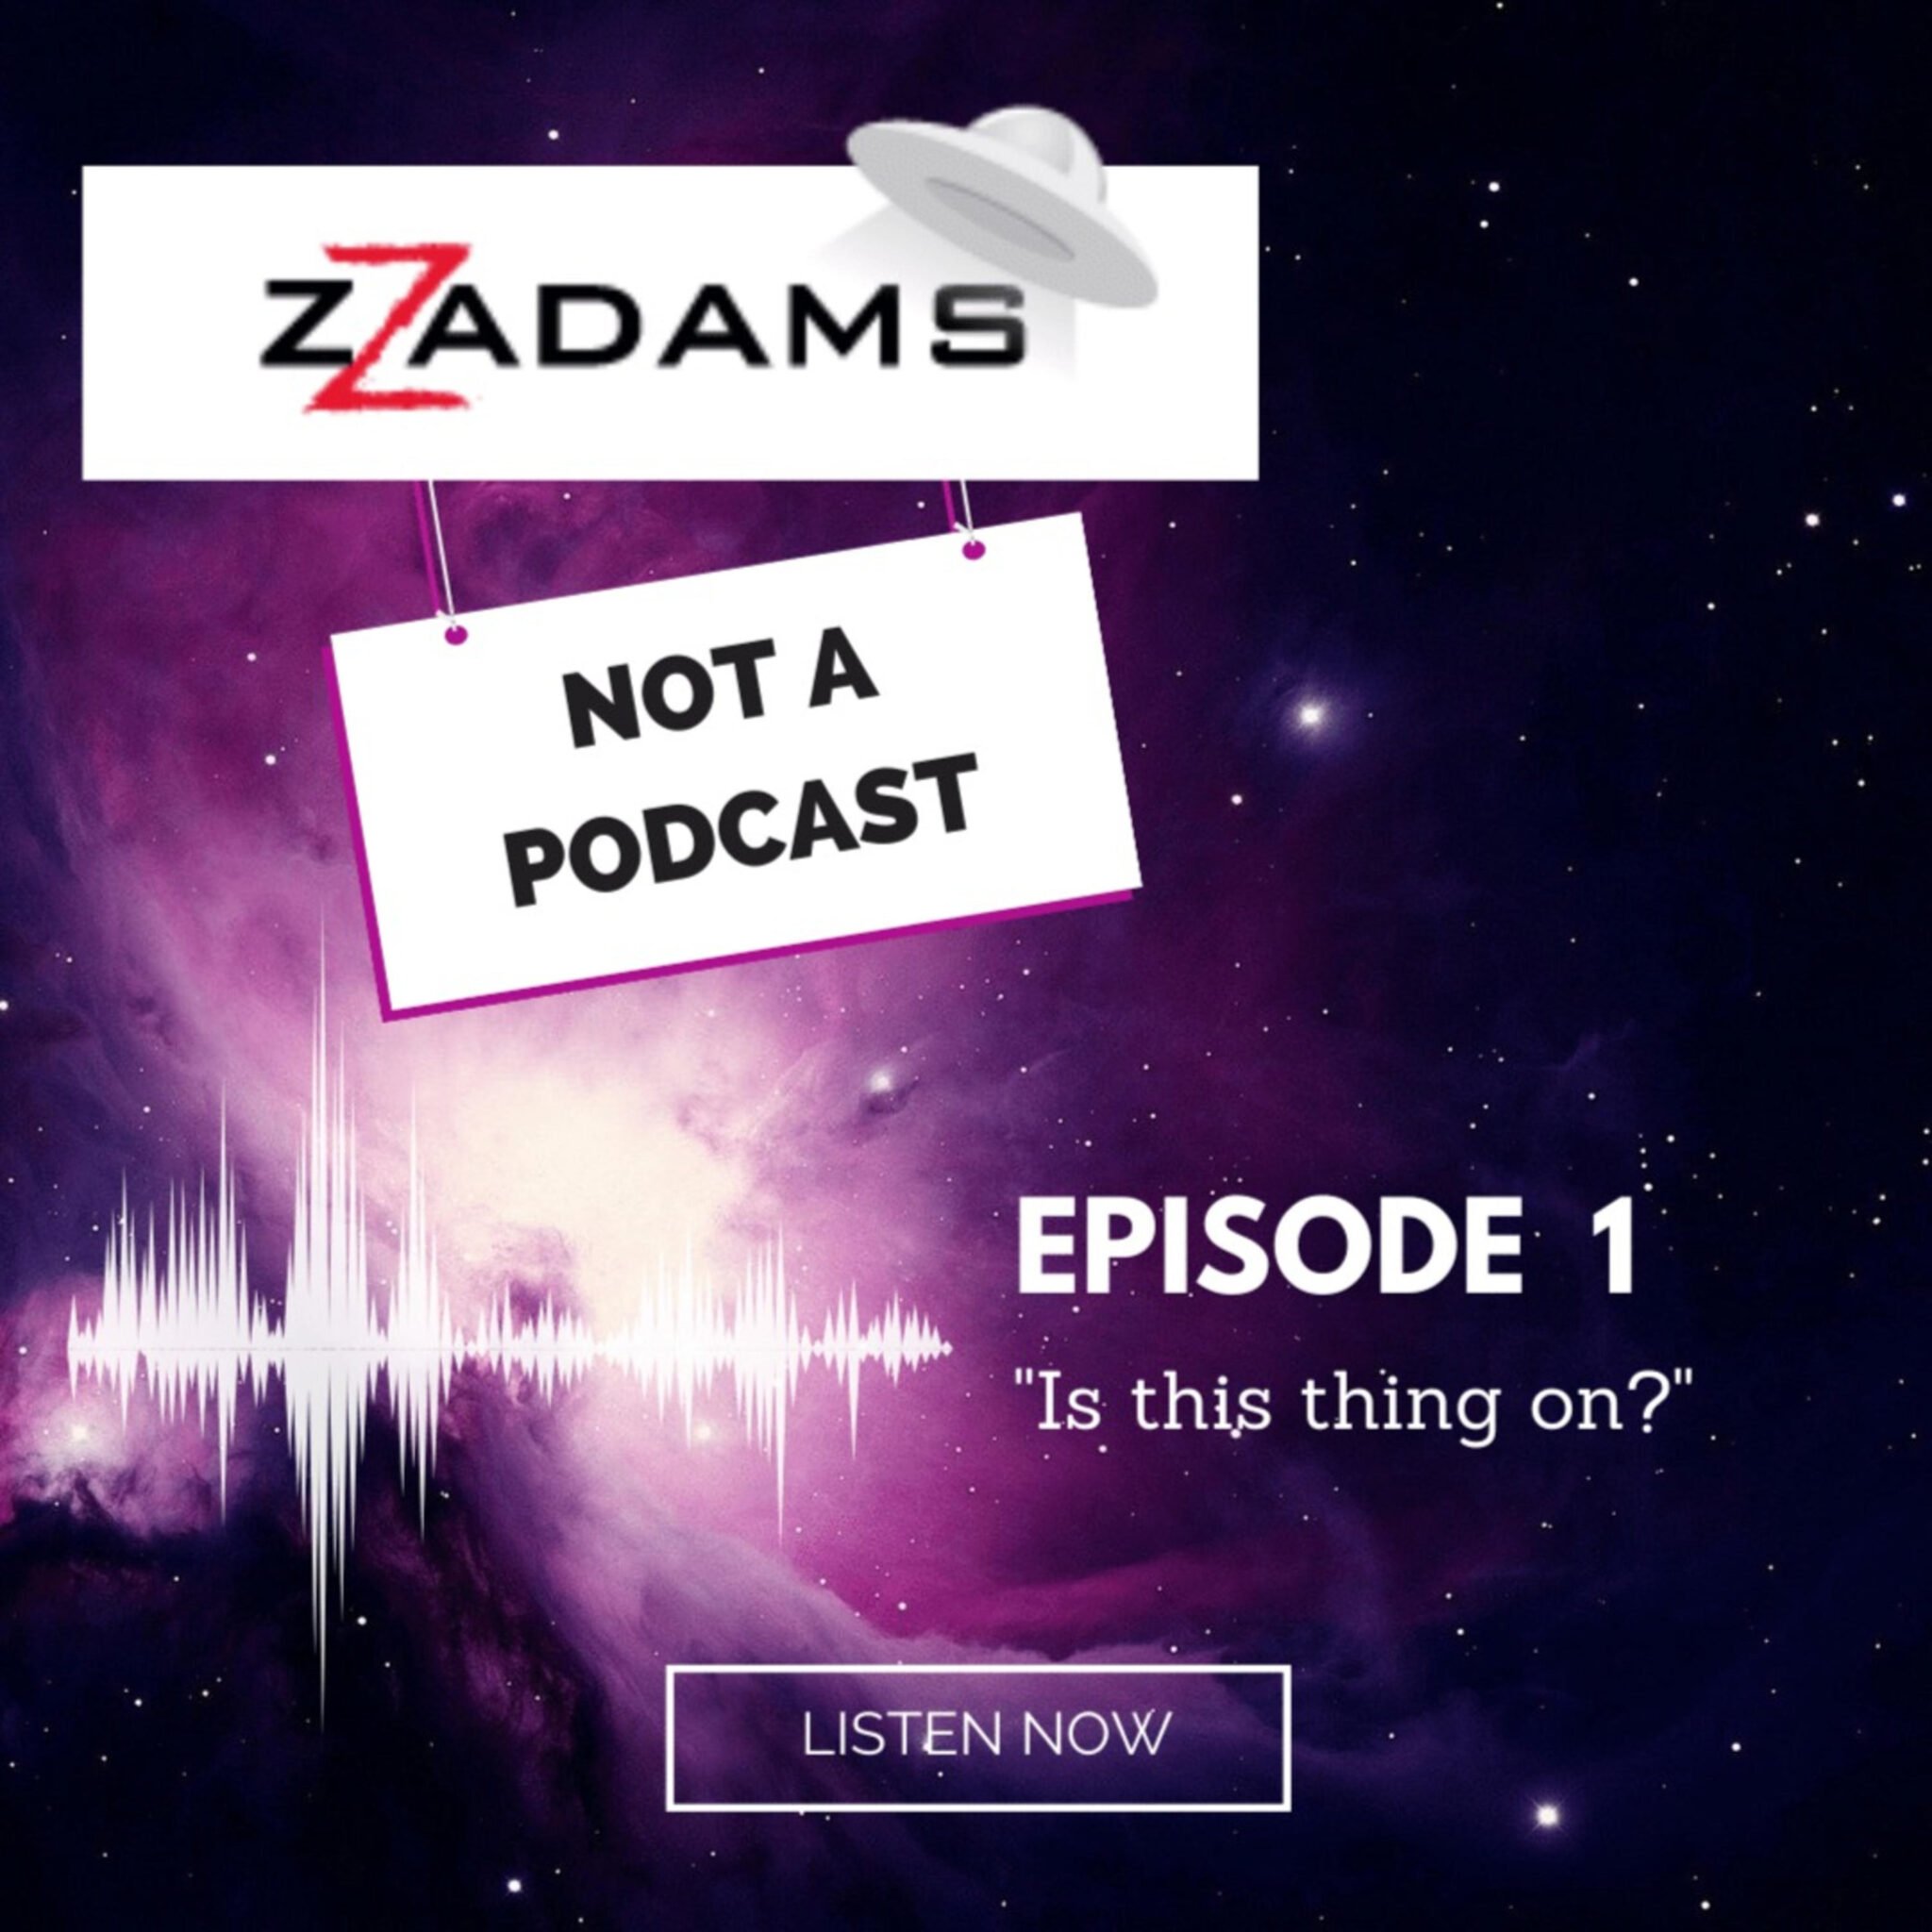 ZZ Adams: Not a Podcast Is this thing on?